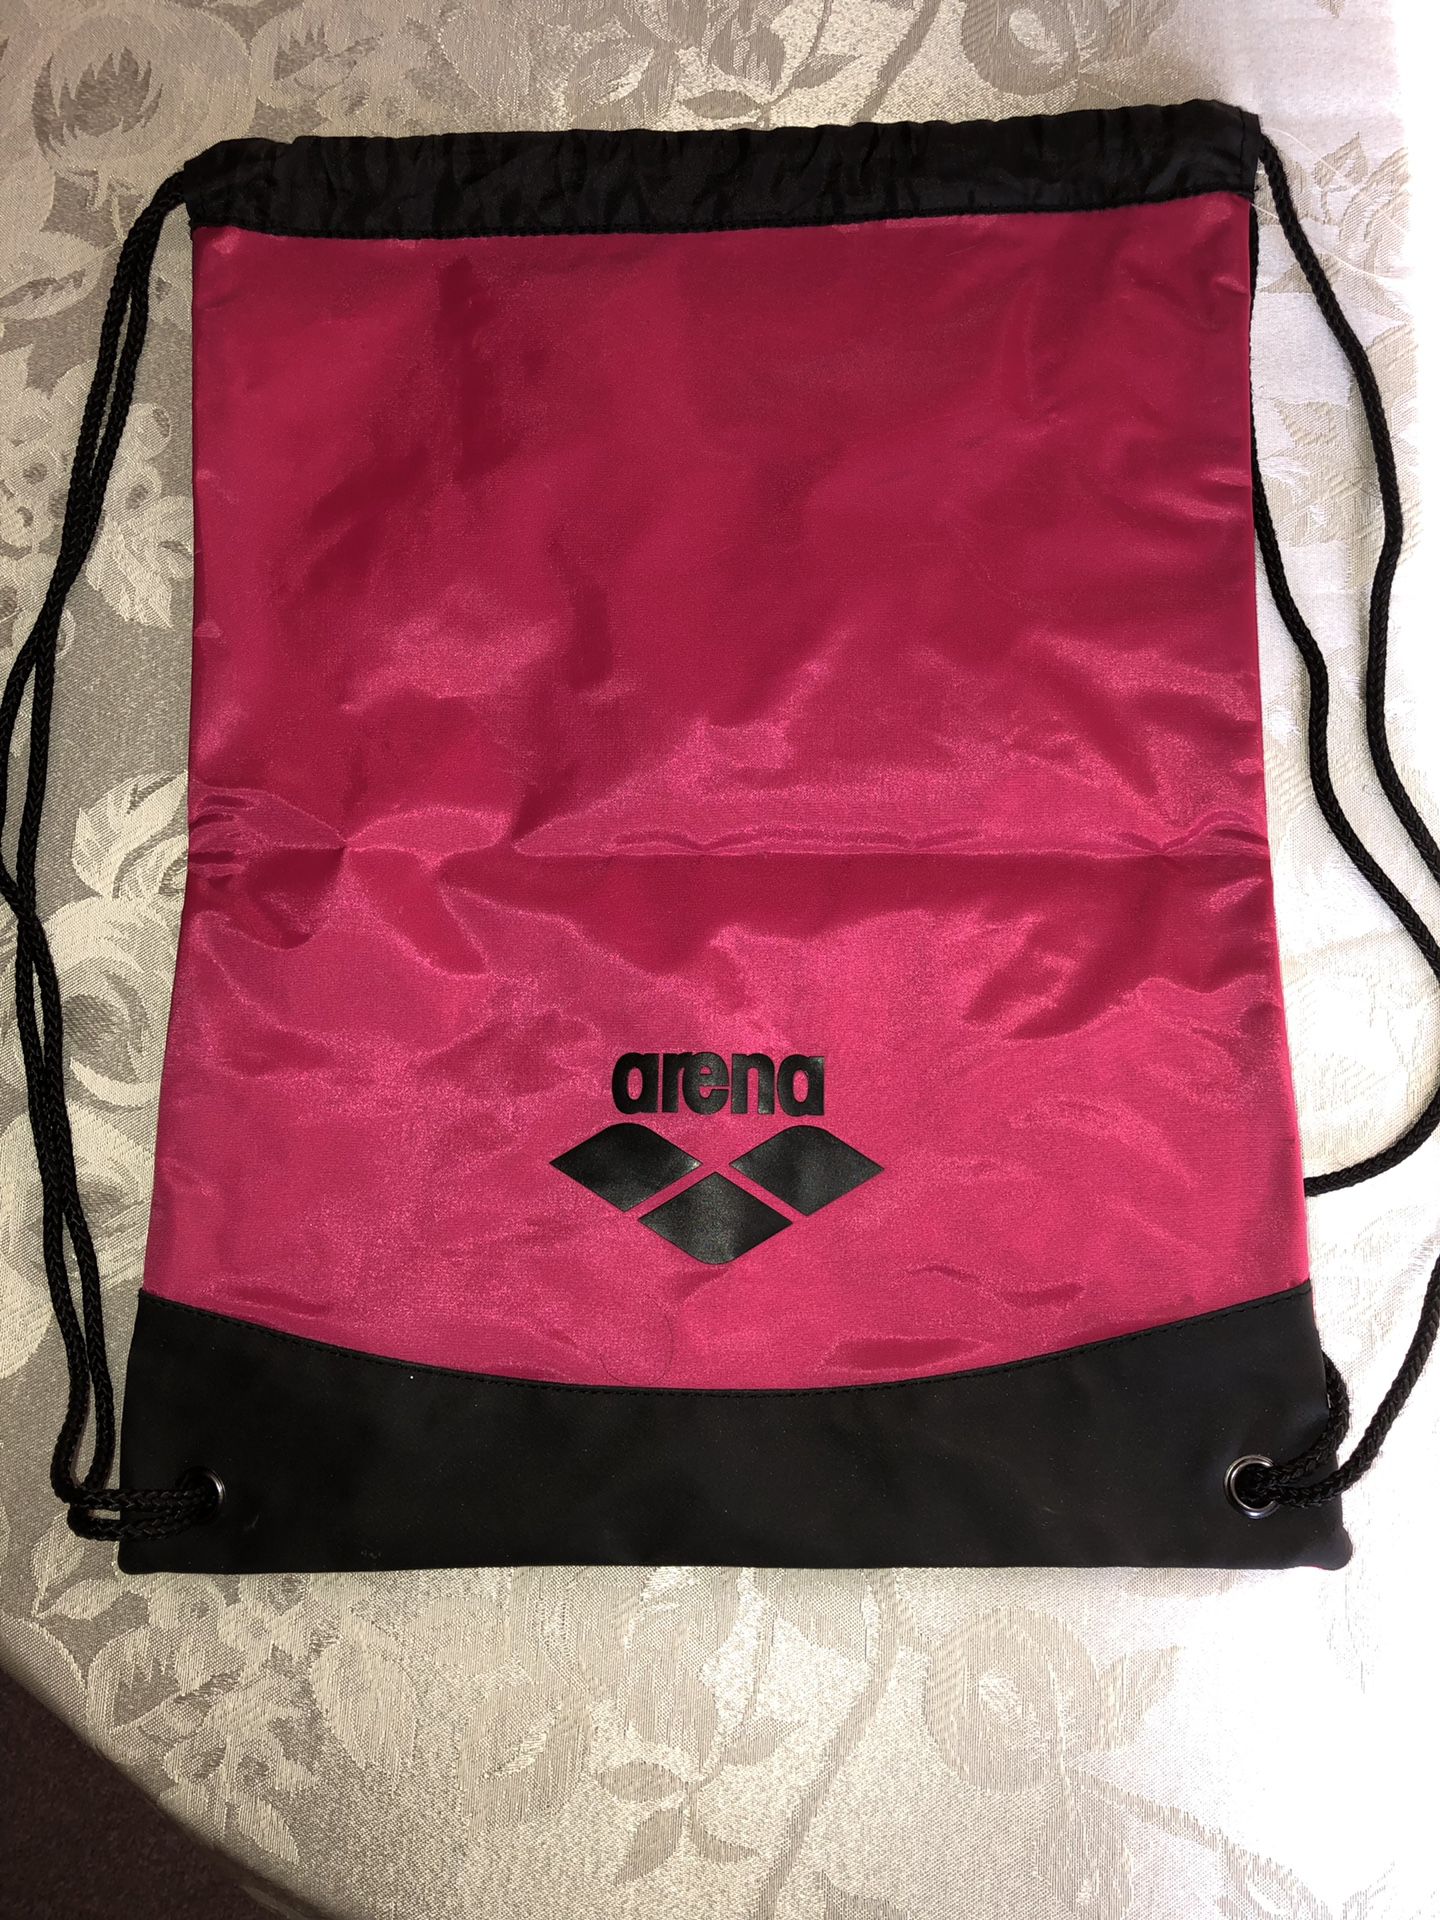 Arena Draw string bag for Pool or gym!